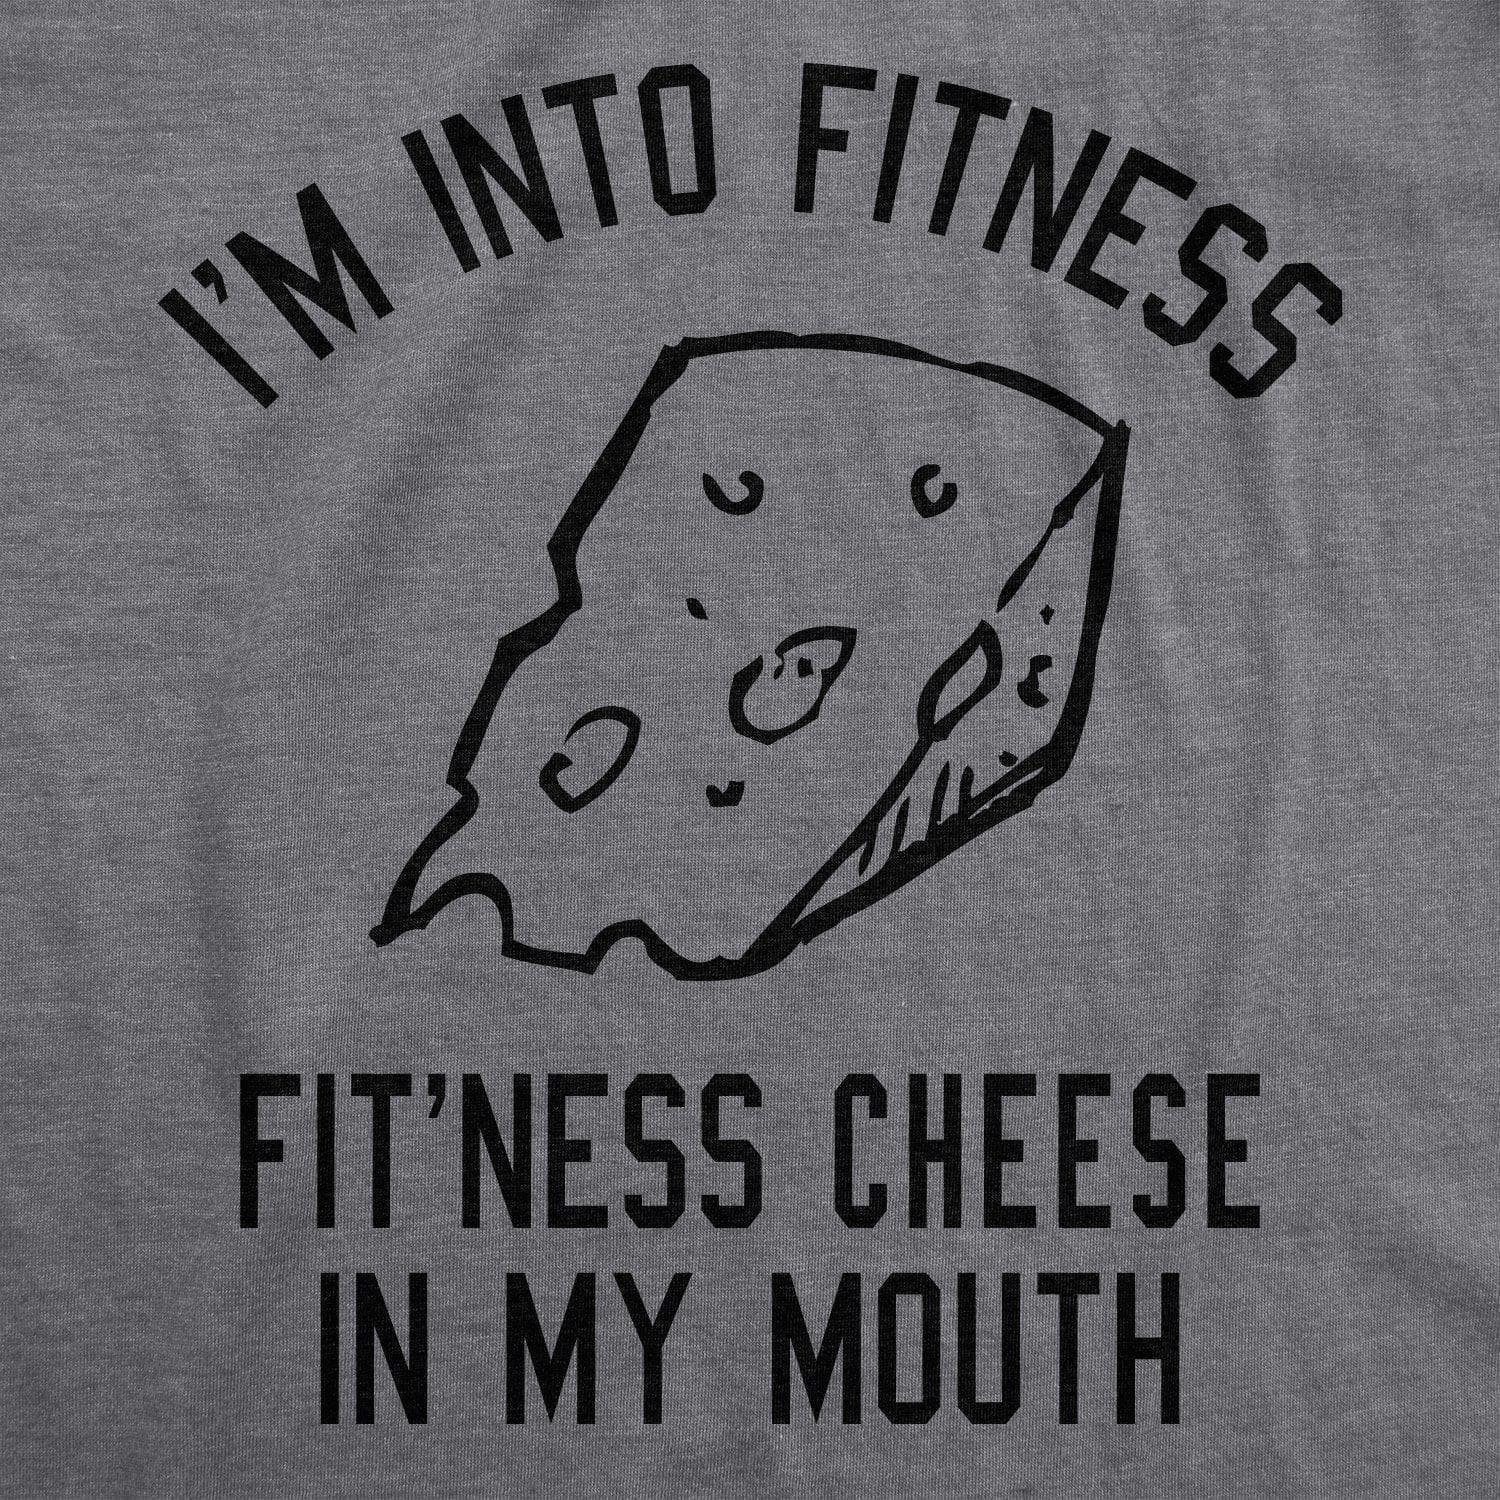 Fitness Cheese In My Mouth Men's Tshirt  -  Crazy Dog T-Shirts